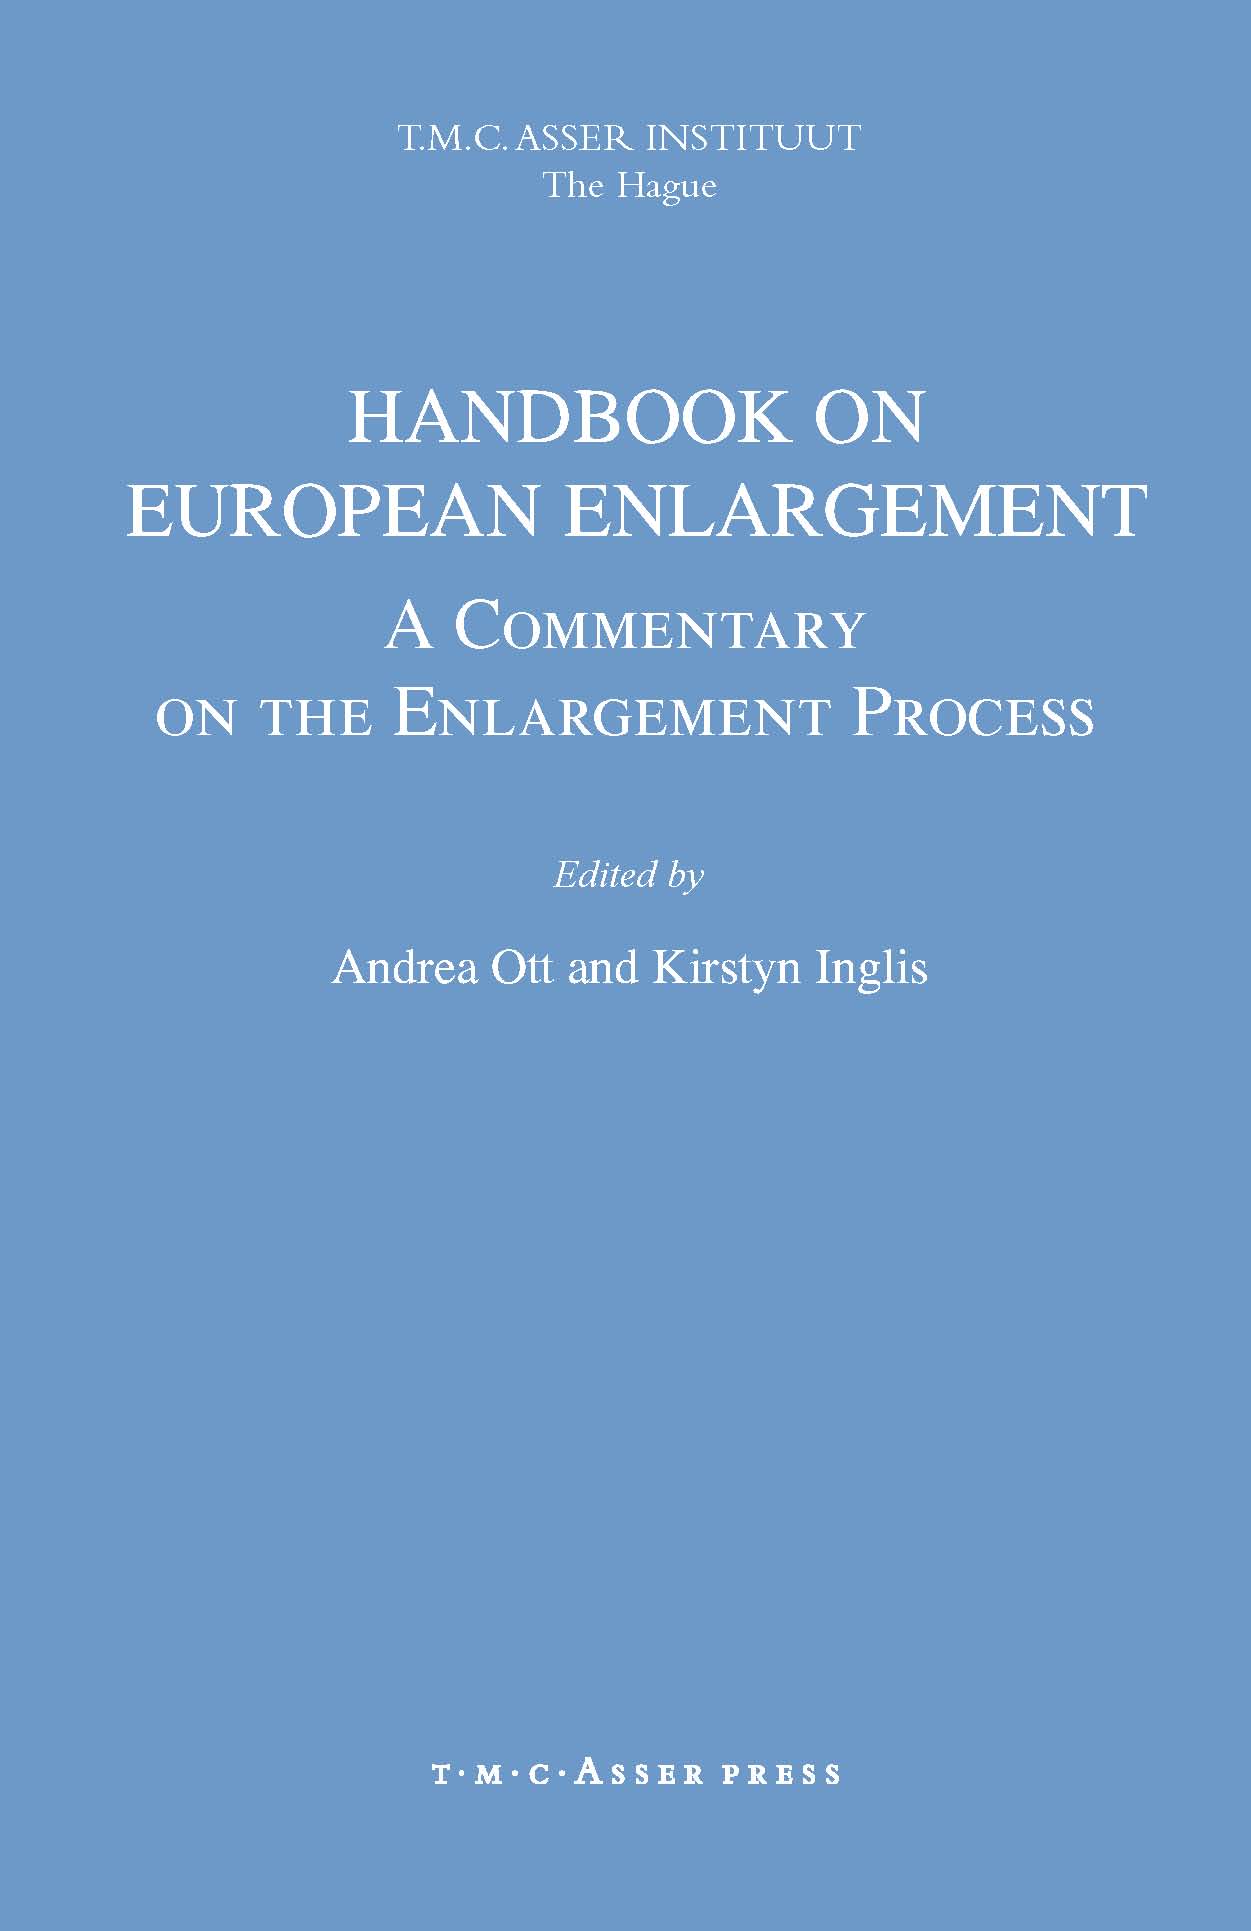 Handbook on European Enlargement - A Commentary on the Enlargement Process